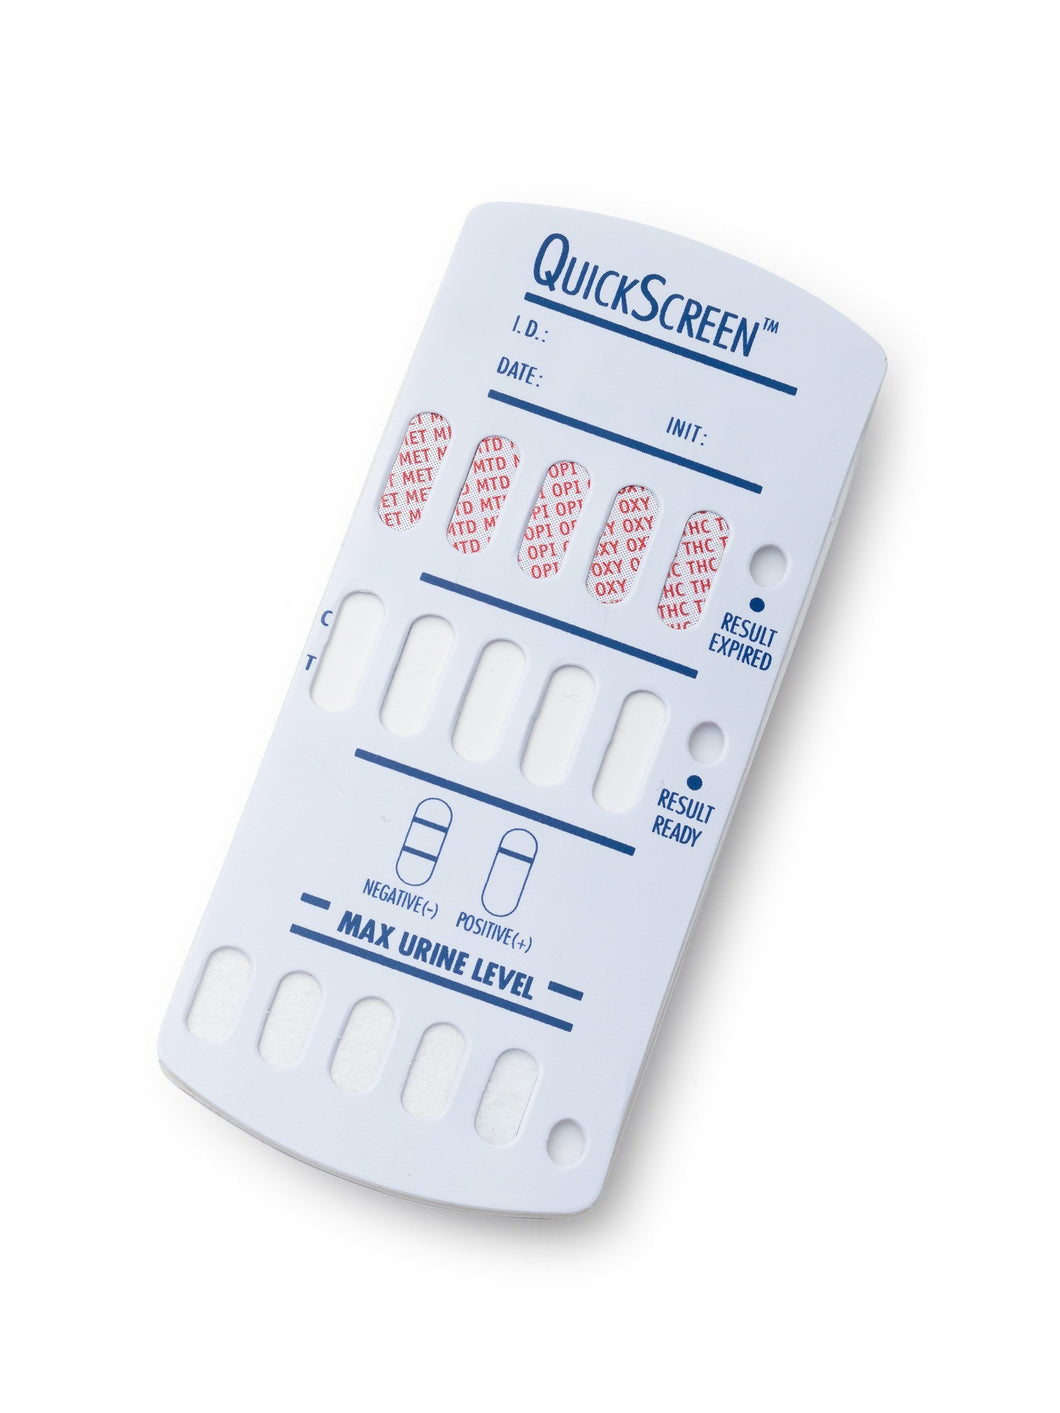 (25 Pack) 10 Panel QuickScreen Dip Card - 9380T - AMP, BAR, BUP, BZD, COC, MET, MTD, OPI-300, OXY, THC + Timer-Countrywide Testing